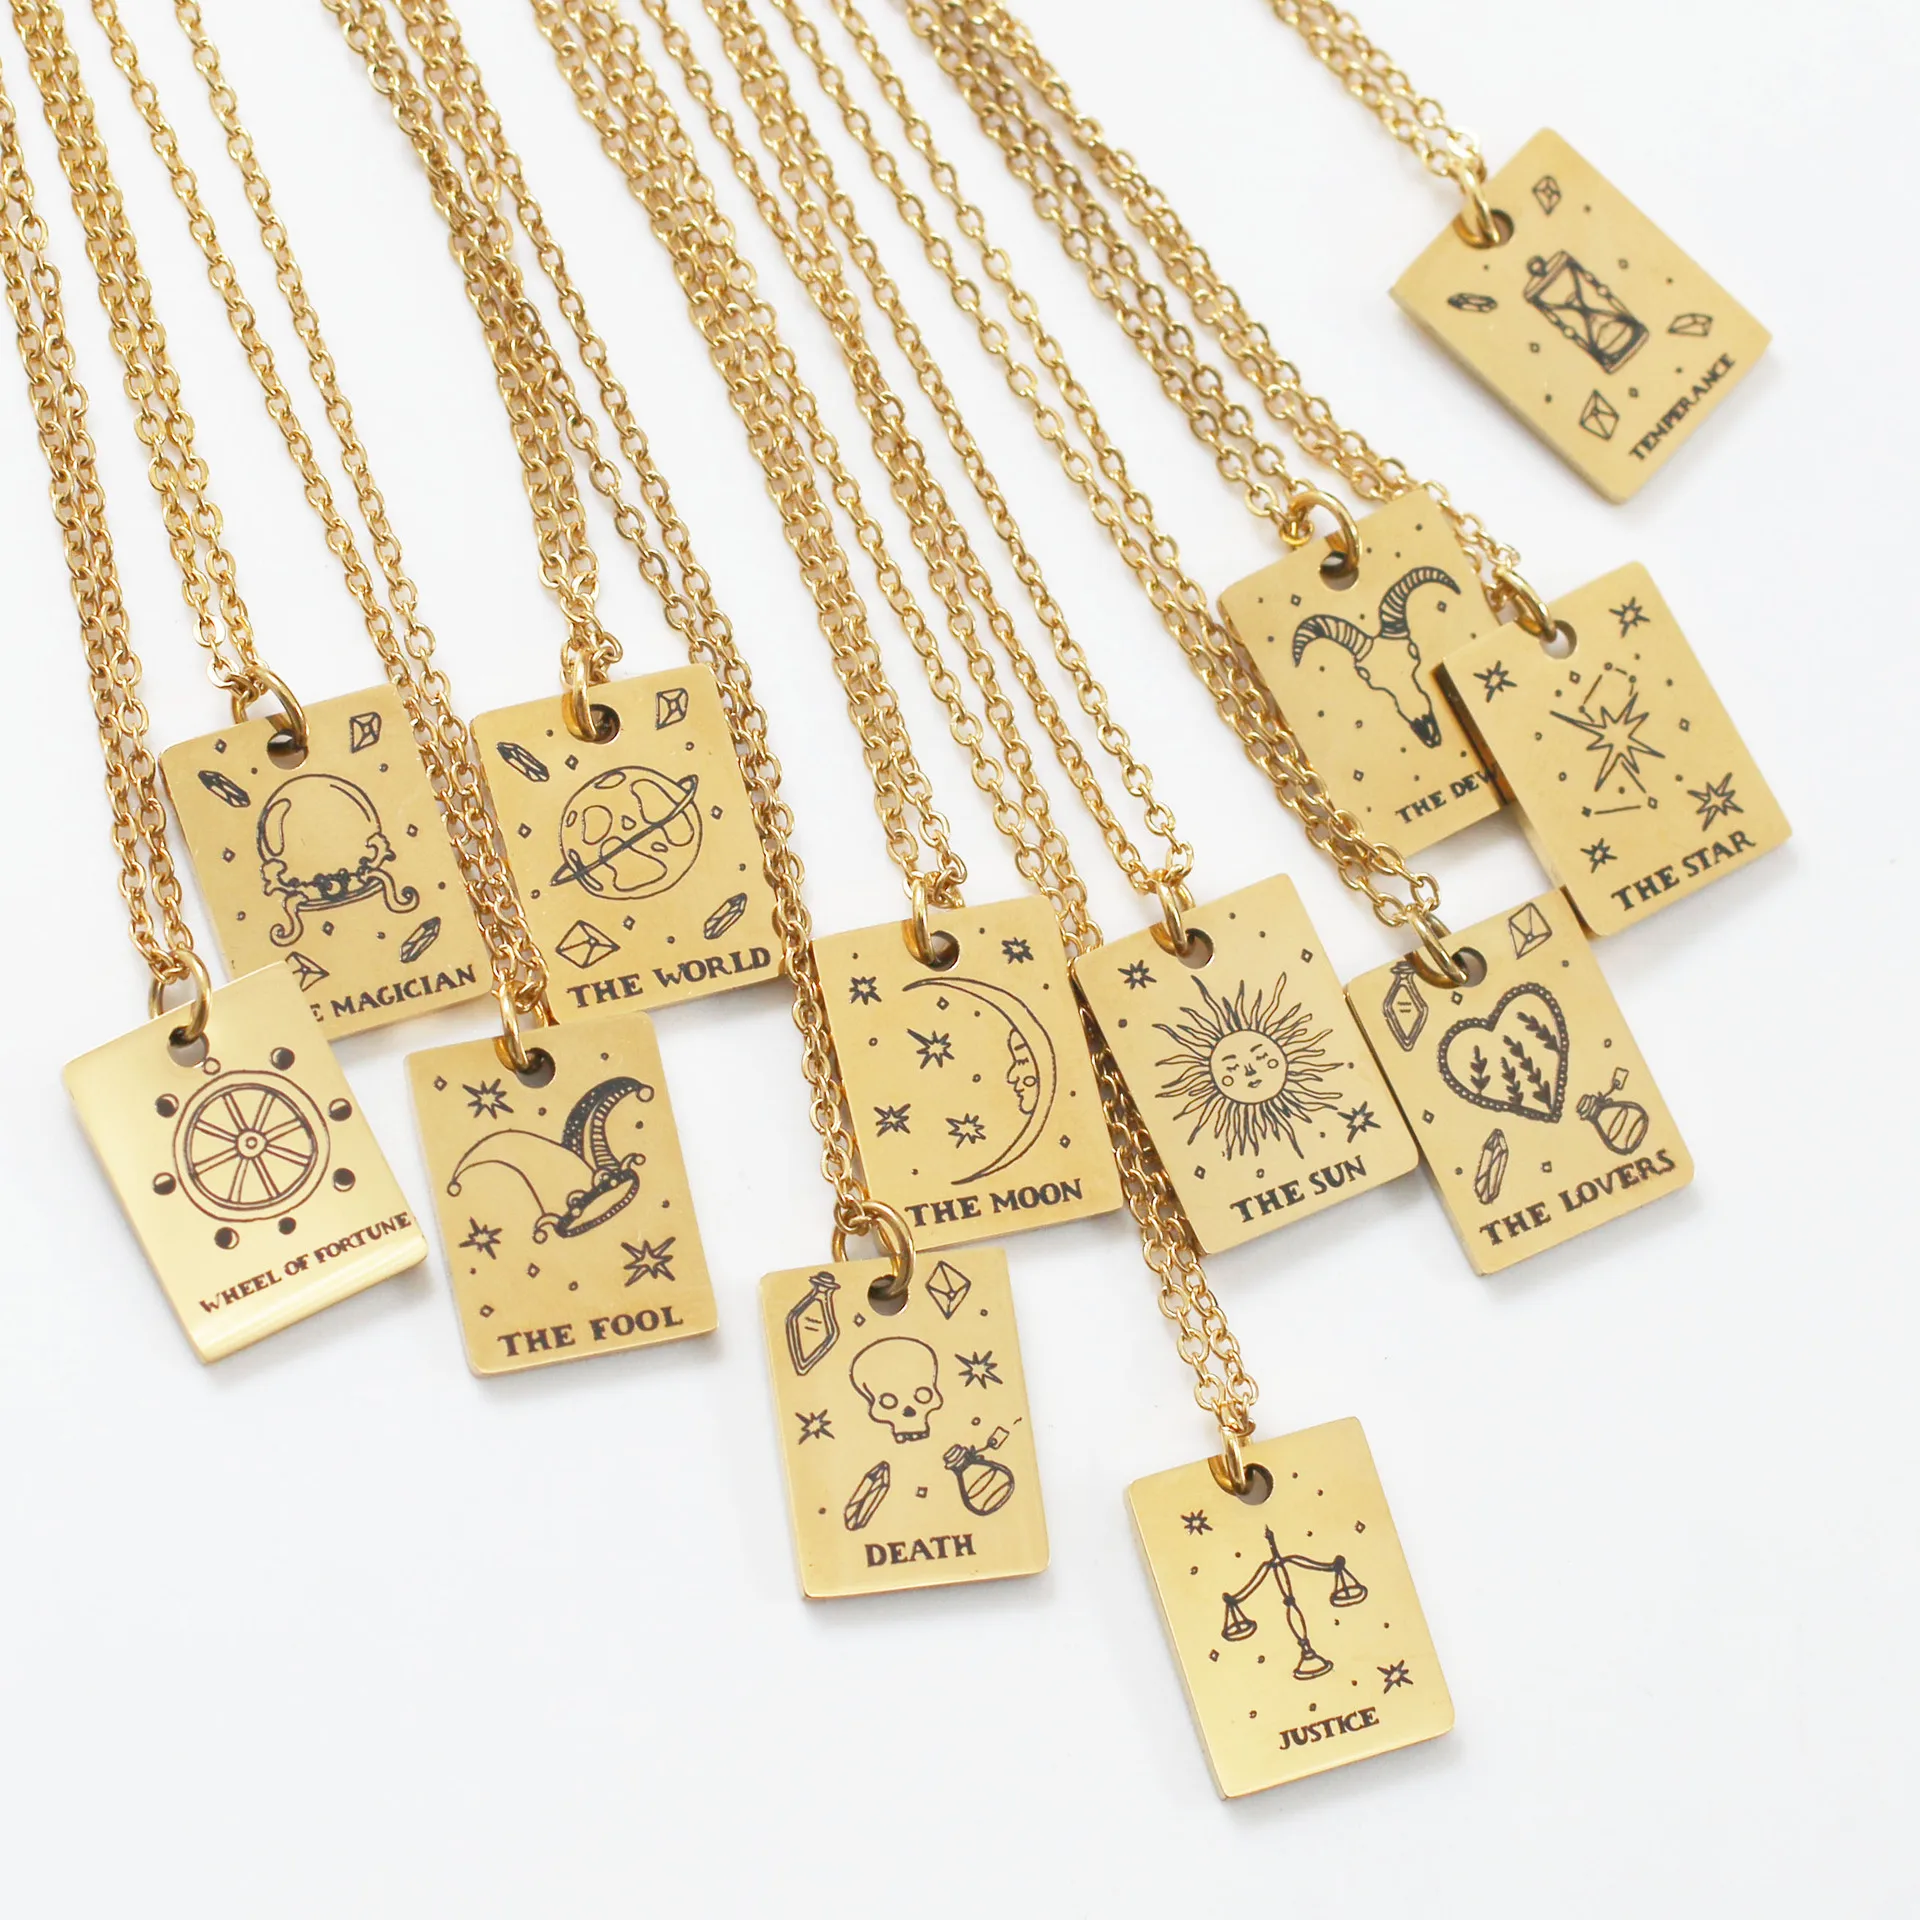 

Custom Jewelry Square 12 Zodiac Paper Tarot Card Necklace 18k Ip Gold Plated Divination Square Medallion Zodiac Tarot Necklace, Siver,steel corol, gold, rose gold,customized